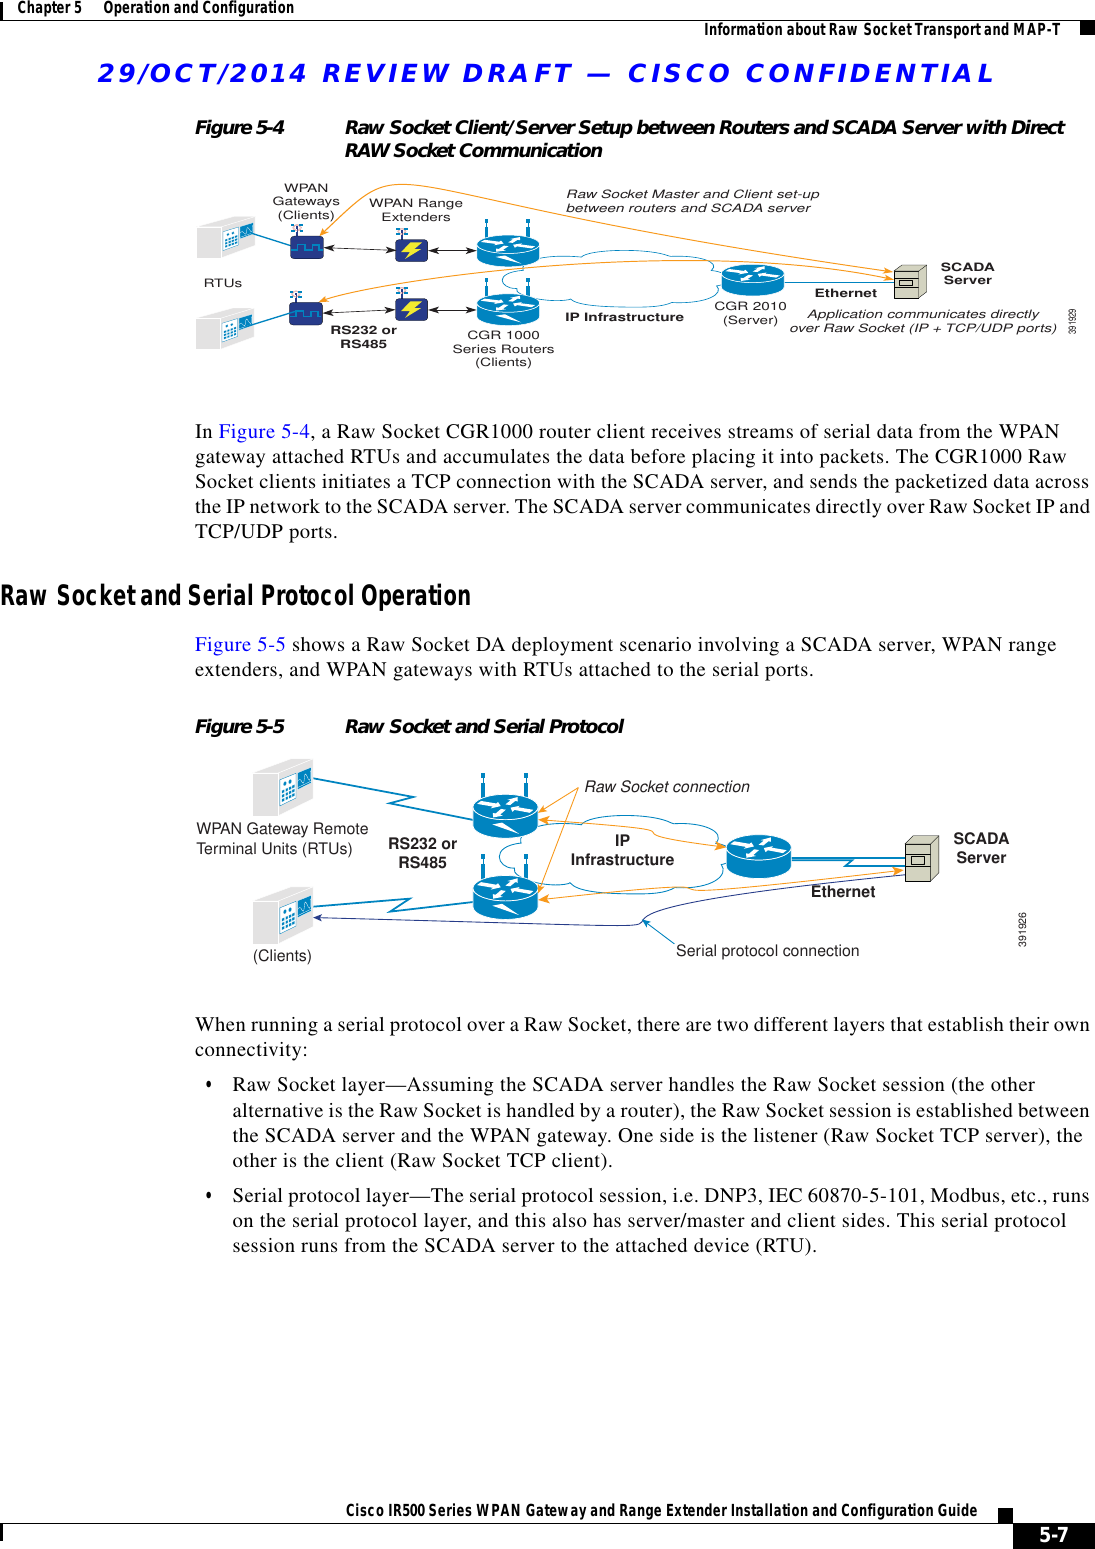 29/OCT/2014 REVIEW DRAFT — CISCO CONFIDENTIAL5-7Cisco IR500 Series WPAN Gateway and Range Extender Installation and Configuration Guide Chapter 5      Operation and Configuration Information about Raw Socket Transport and MAP-TFigure 5-4 Raw Socket Client/Server Setup between Routers and SCADA Server with Direct RAW Socket CommunicationRaw Socket Master and Client set-upbetween routers and SCADA serverApplication communicates directlyover Raw Socket (IP + TCP/UDP ports)IP InfrastructureEthernetSCADAServer391929RS232 orRS485RTUsWPAN RangeExtendersWPANGateways(Clients)CGR 2010(Server)CGR 1000Series Routers(Clients)In Figure 5-4, a Raw Socket CGR1000 router client receives streams of serial data from the WPAN gateway attached RTUs and accumulates the data before placing it into packets. The CGR1000 Raw Socket clients initiates a TCP connection with the SCADA server, and sends the packetized data across the IP network to the SCADA server. The SCADA server communicates directly over Raw Socket IP and TCP/UDP ports.Raw Socket and Serial Protocol OperationFigure 5-5 shows a Raw Socket DA deployment scenario involving a SCADA server, WPAN range extenders, and WPAN gateways with RTUs attached to the serial ports.Figure 5-5 Raw Socket and Serial ProtocolWPAN Gateway RemoteTerminal Units (RTUs)(Clients)Raw Socket connectionSerial protocol connectionRS232 orRS485IPInfrastructureEthernetSCADAServer391926When running a serial protocol over a Raw Socket, there are two different layers that establish their own connectivity:  • Raw Socket layer—Assuming the SCADA server handles the Raw Socket session (the other alternative is the Raw Socket is handled by a router), the Raw Socket session is established between the SCADA server and the WPAN gateway. One side is the listener (Raw Socket TCP server), the other is the client (Raw Socket TCP client).  • Serial protocol layer—The serial protocol session, i.e. DNP3, IEC 60870-5-101, Modbus, etc., runs on the serial protocol layer, and this also has server/master and client sides. This serial protocol session runs from the SCADA server to the attached device (RTU).